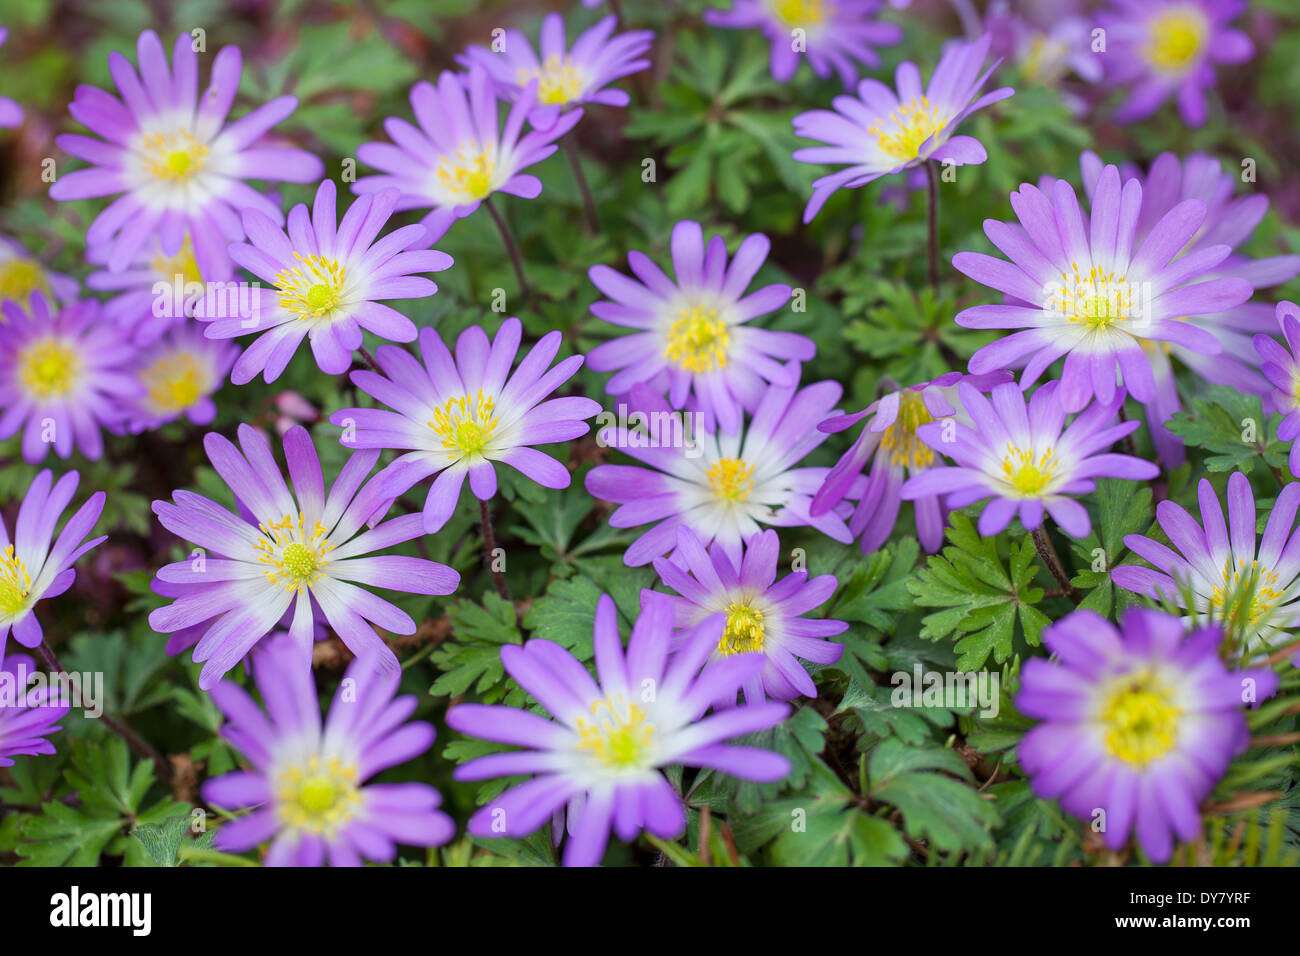 Close up of Anemone blanda 'Violet Star', Greek windflower. Perennial, April. Purple and white flowers. Stock Photo